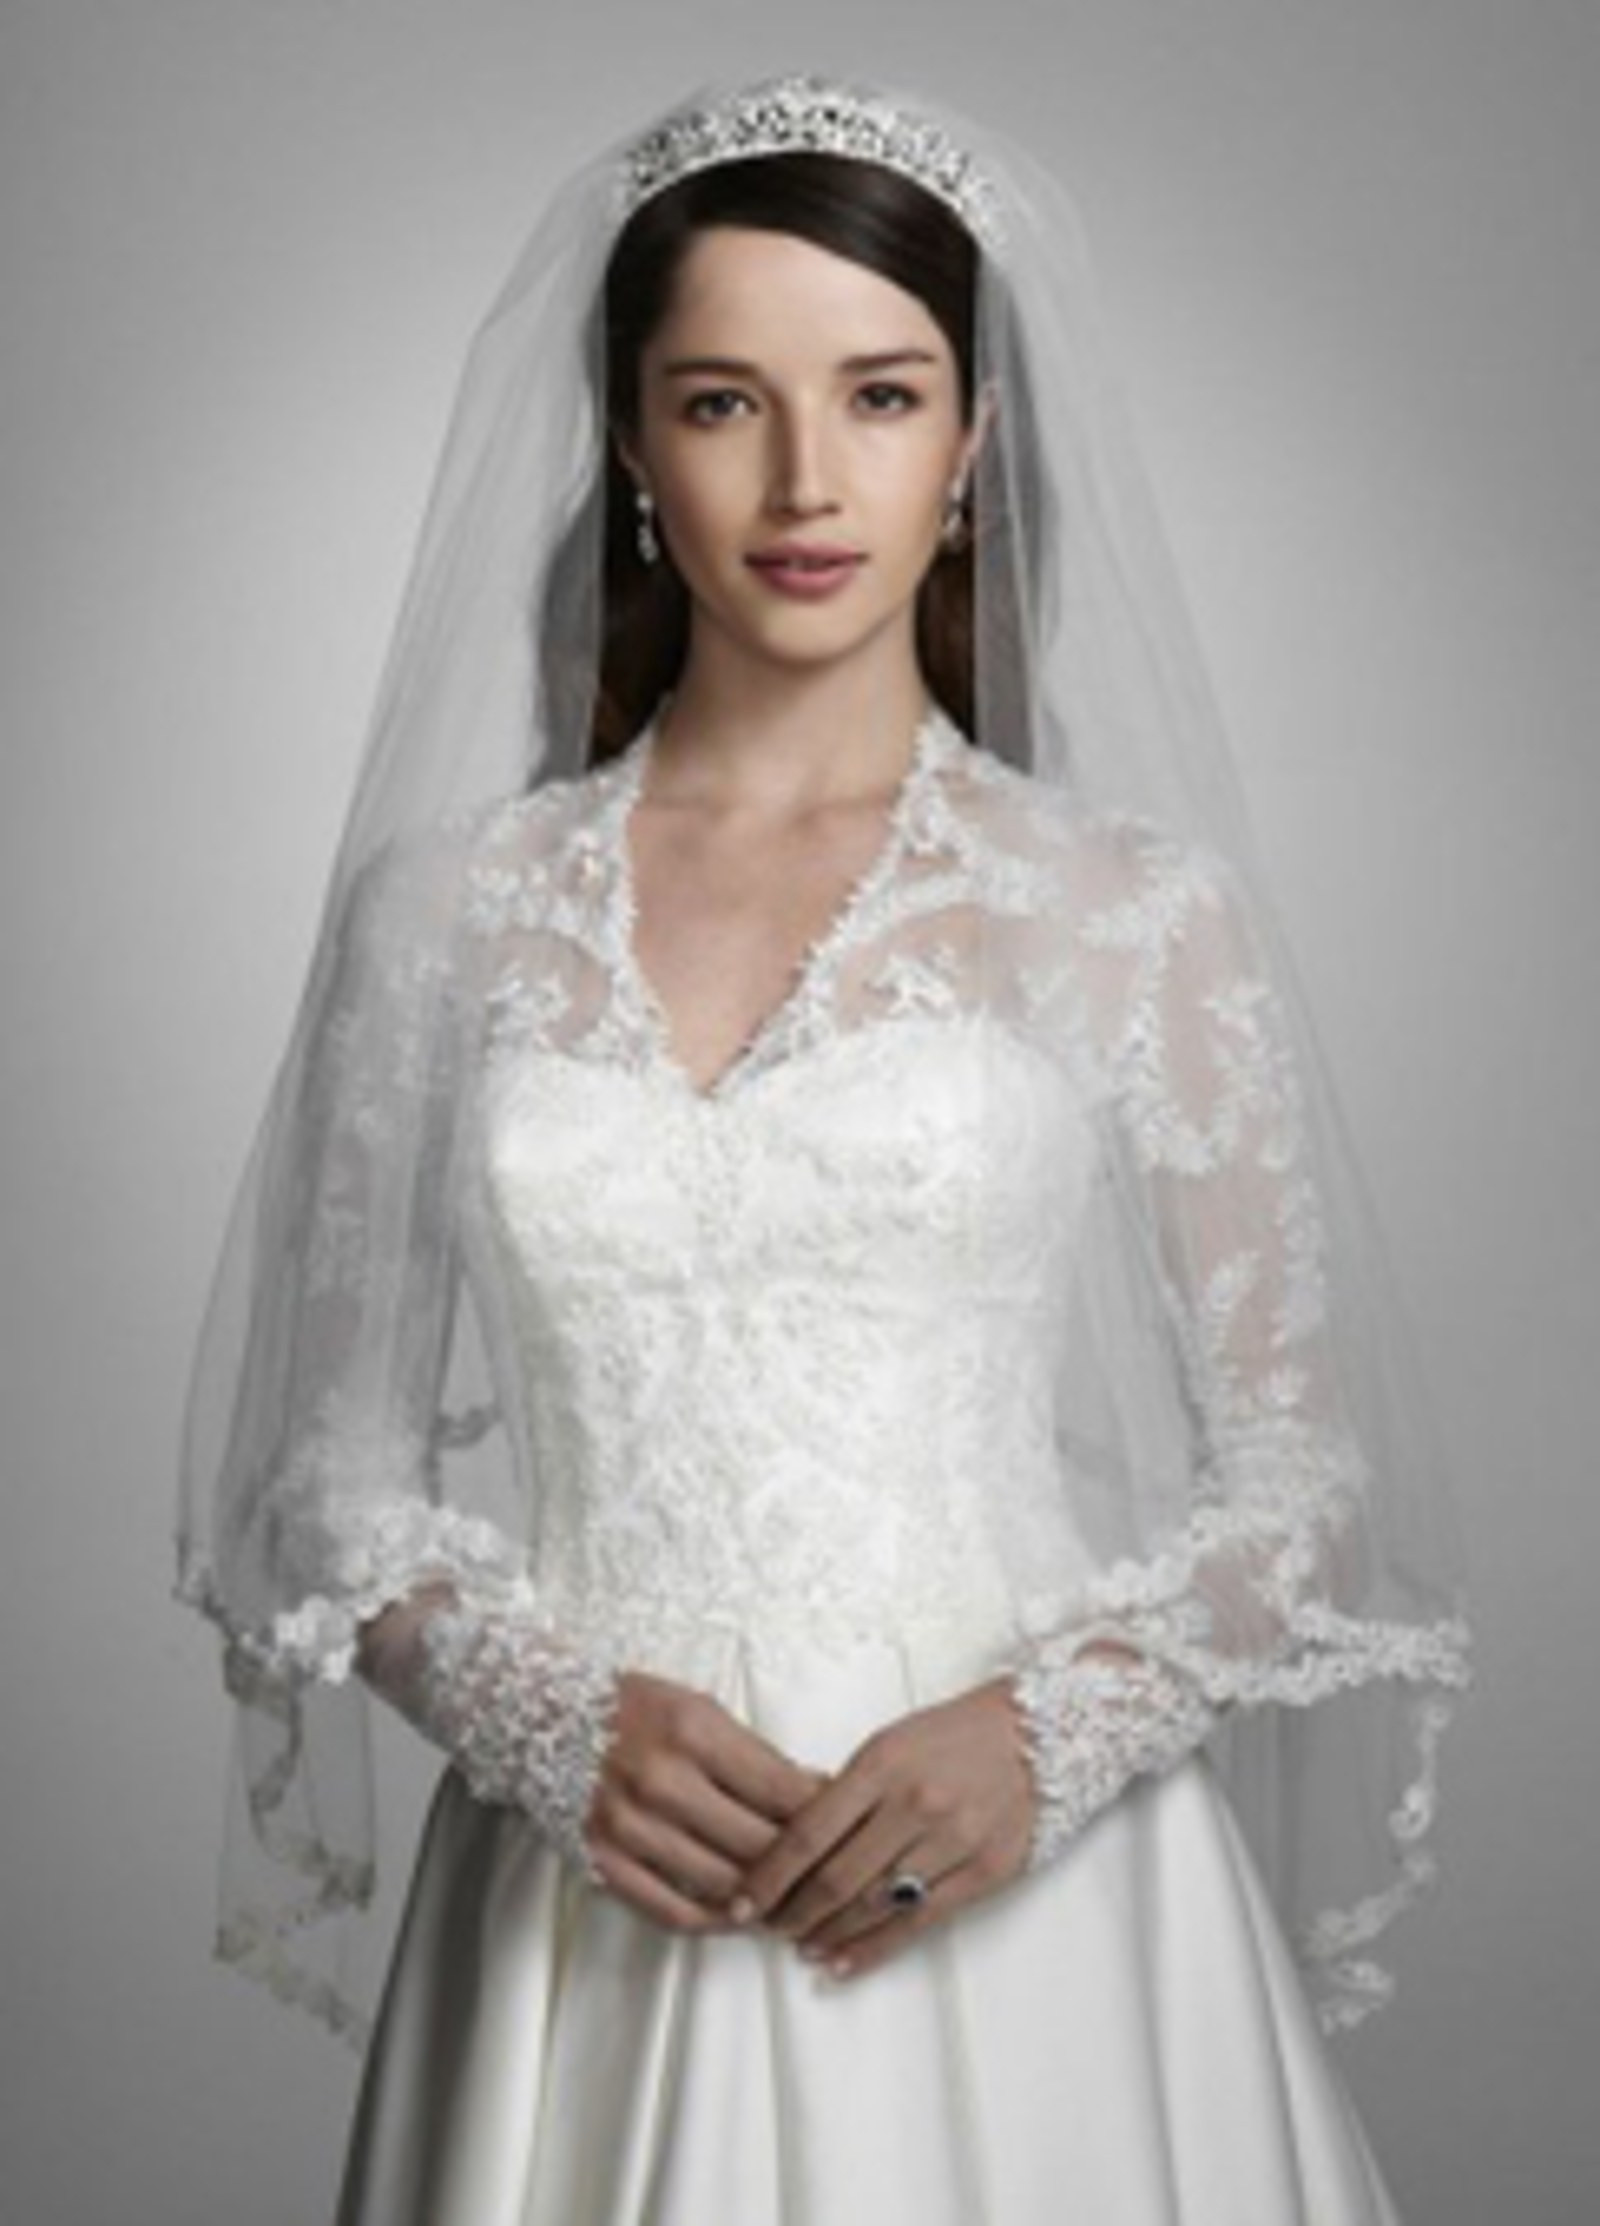 Wedding Veil Pictures
 27 Wedding Veils for Classic Brides Modern Brides and